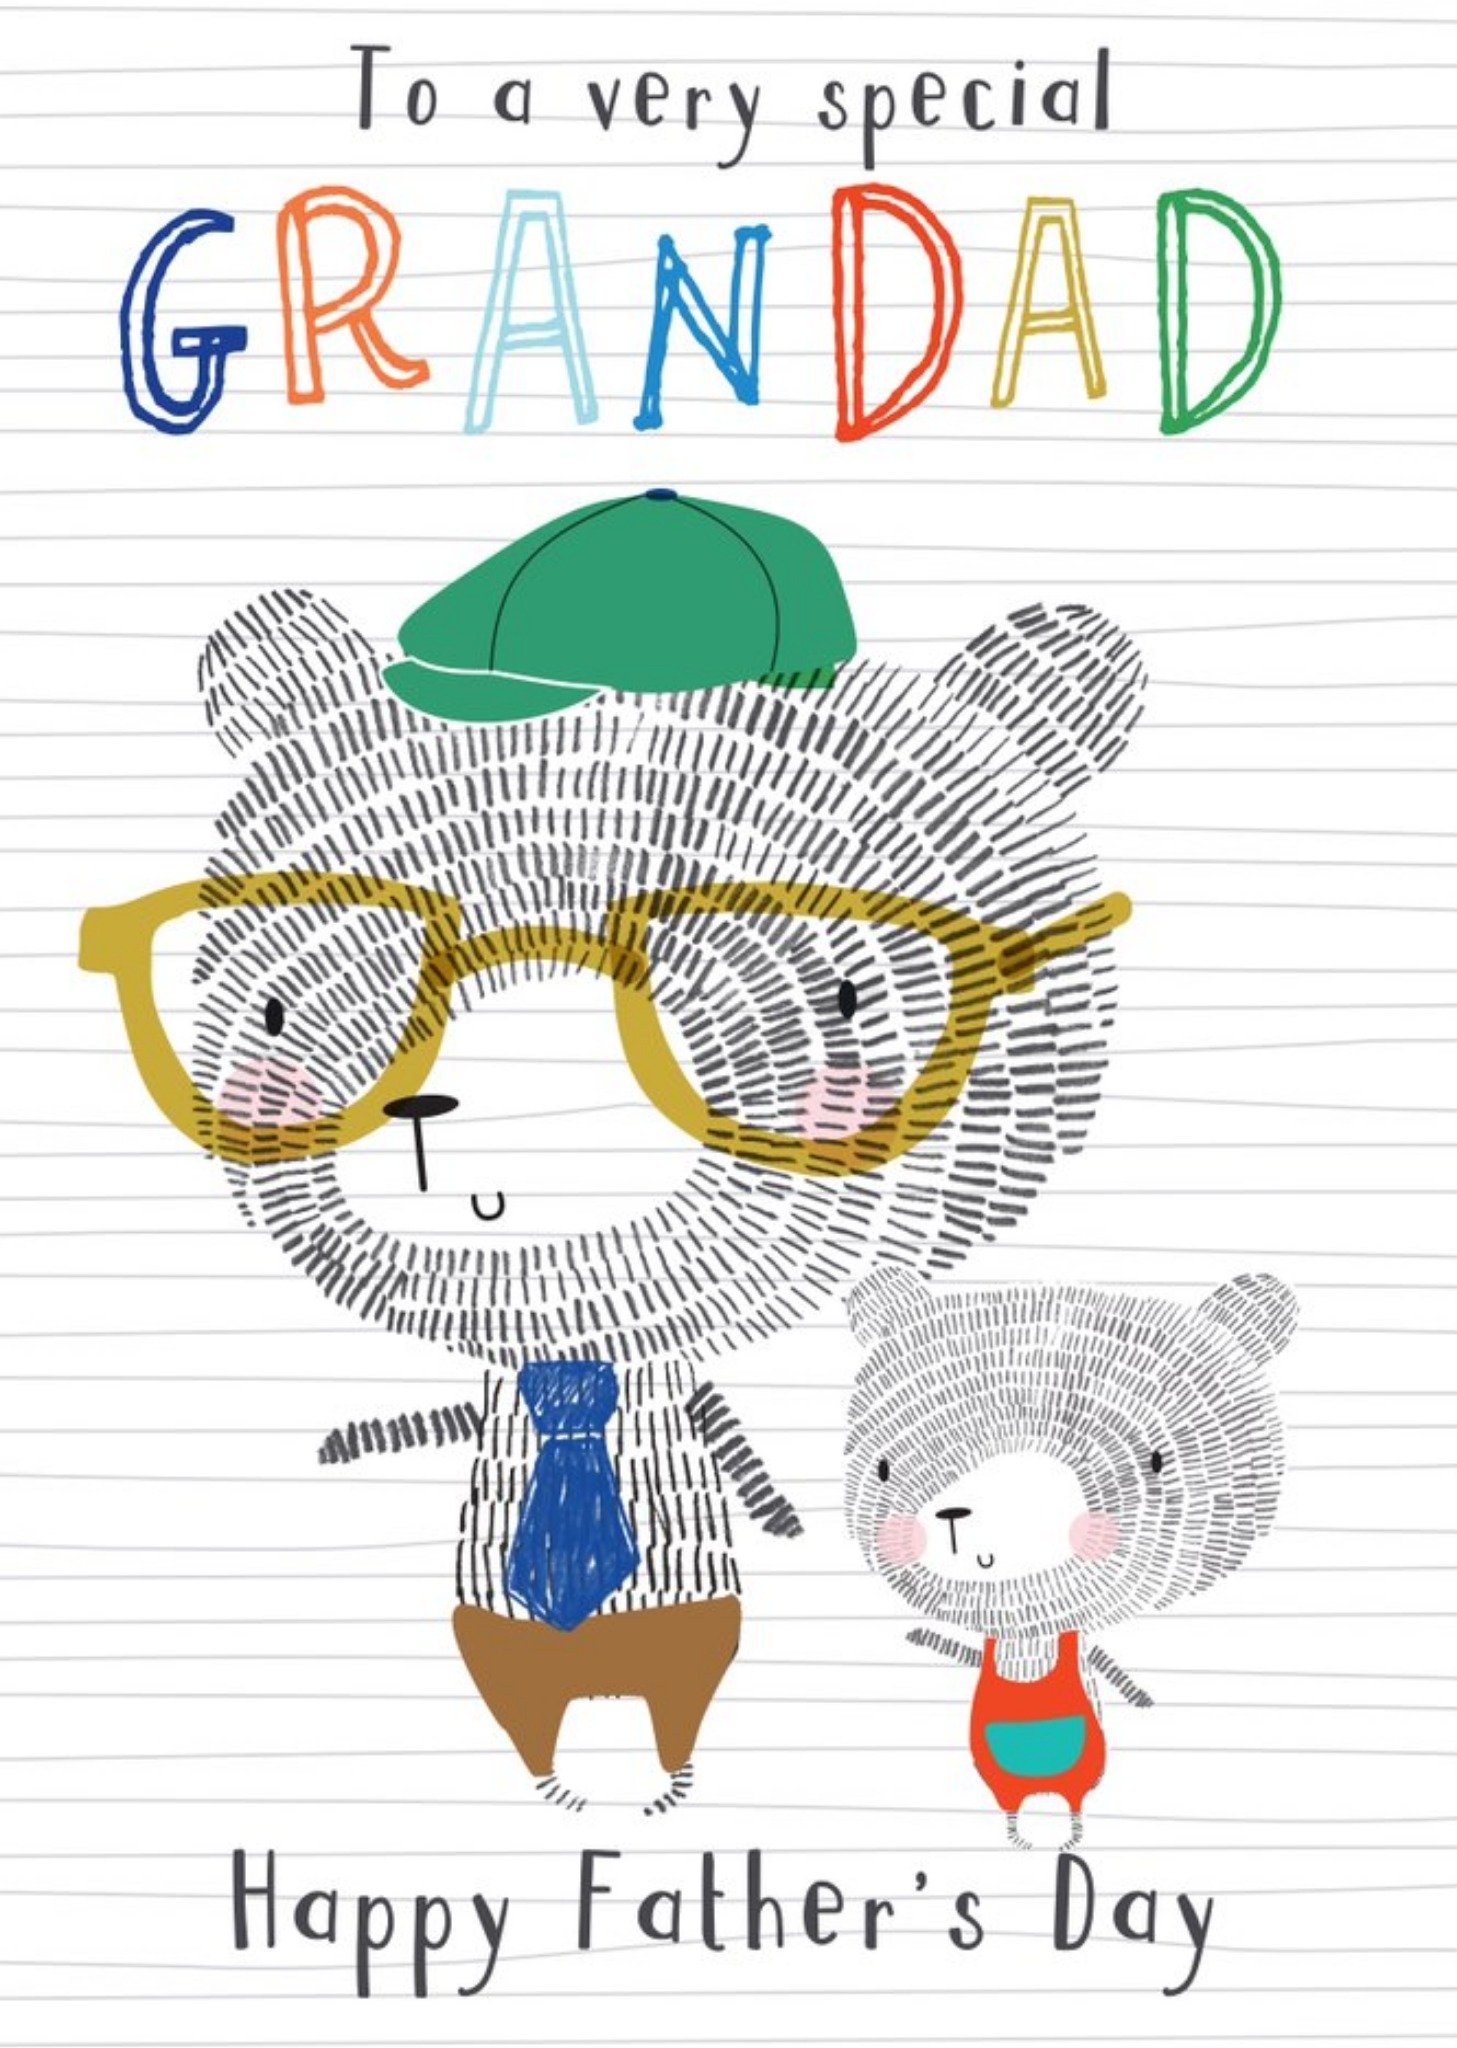 Moonpig Colourful Bear Illustration Special Grandad Father's Day Card Ecard